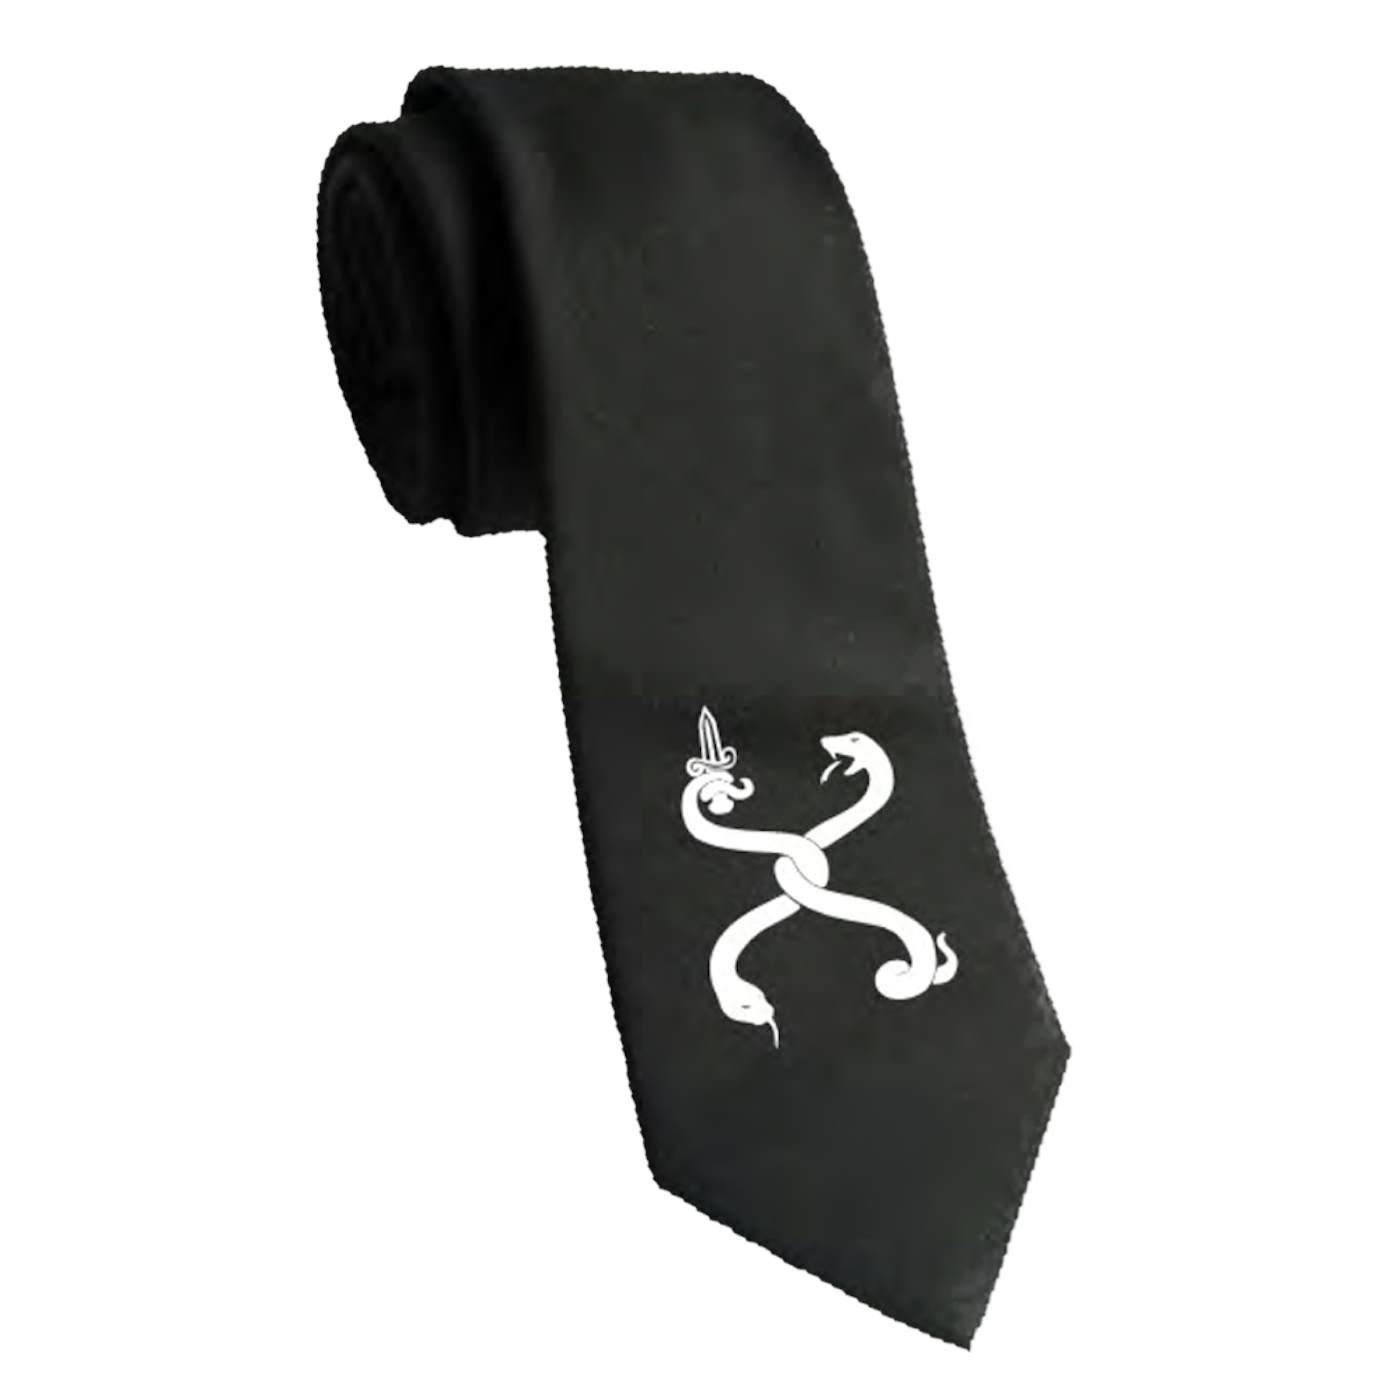 Flogging Molly Snakes Tie